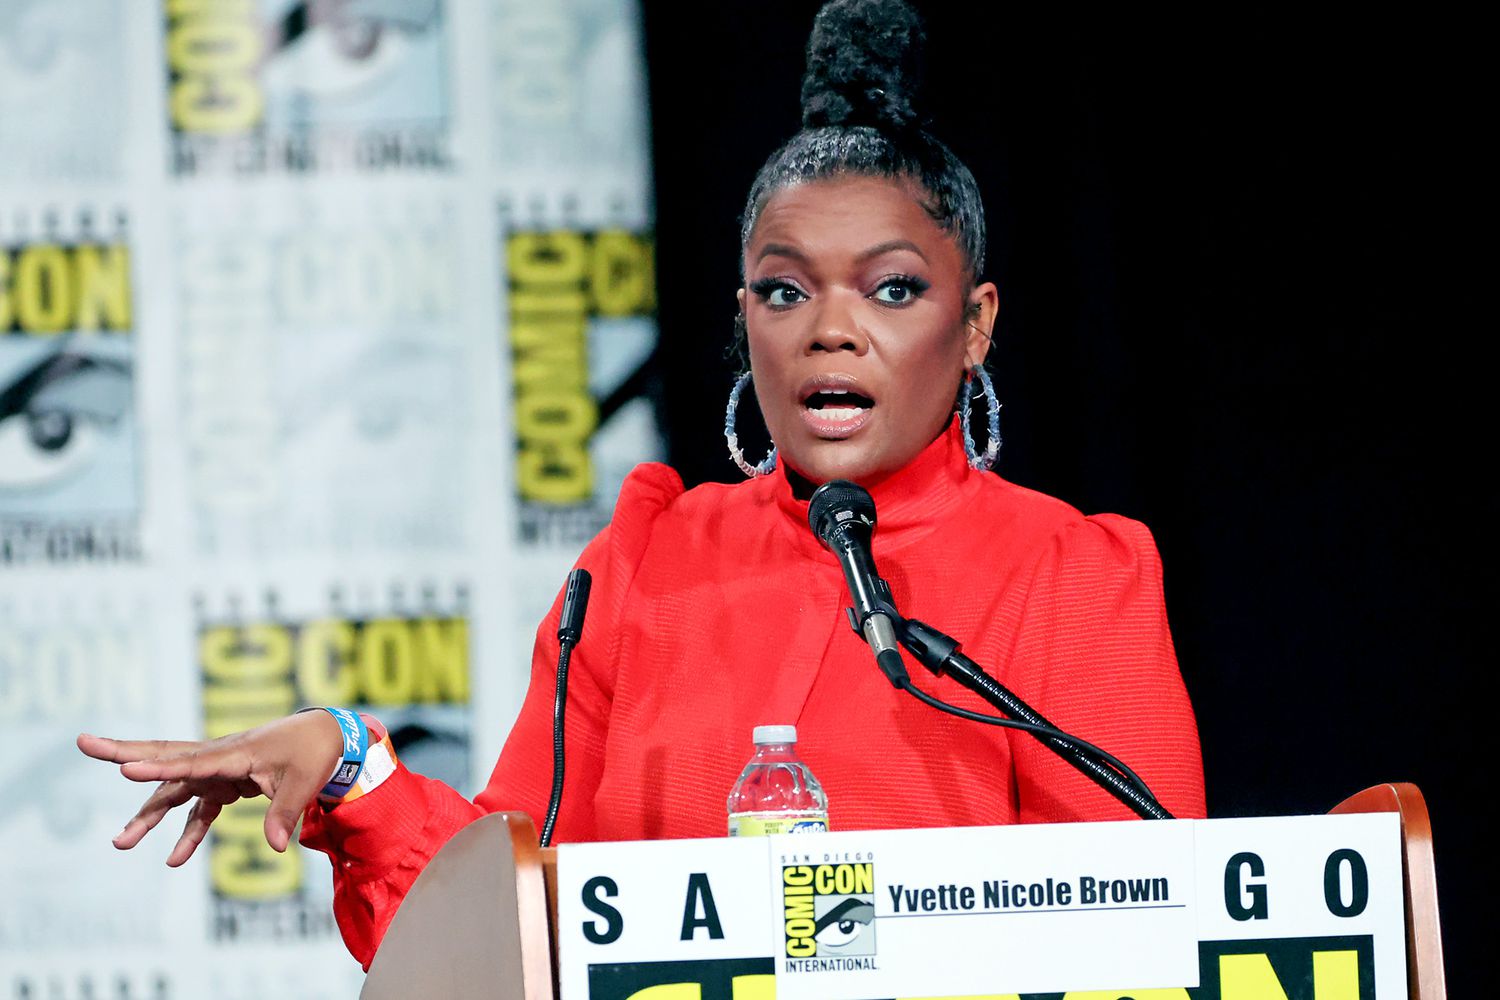 SAN DIEGO, CALIFORNIA - JULY 22: Yvette Nicole Brown speaks onstage at the "Paper Girls" panel during 2022 Comic-Con International: San Diego at San Diego Convention Center on July 22, 2022 in San Diego, California. (Photo by Amy Sussman/Getty Images)